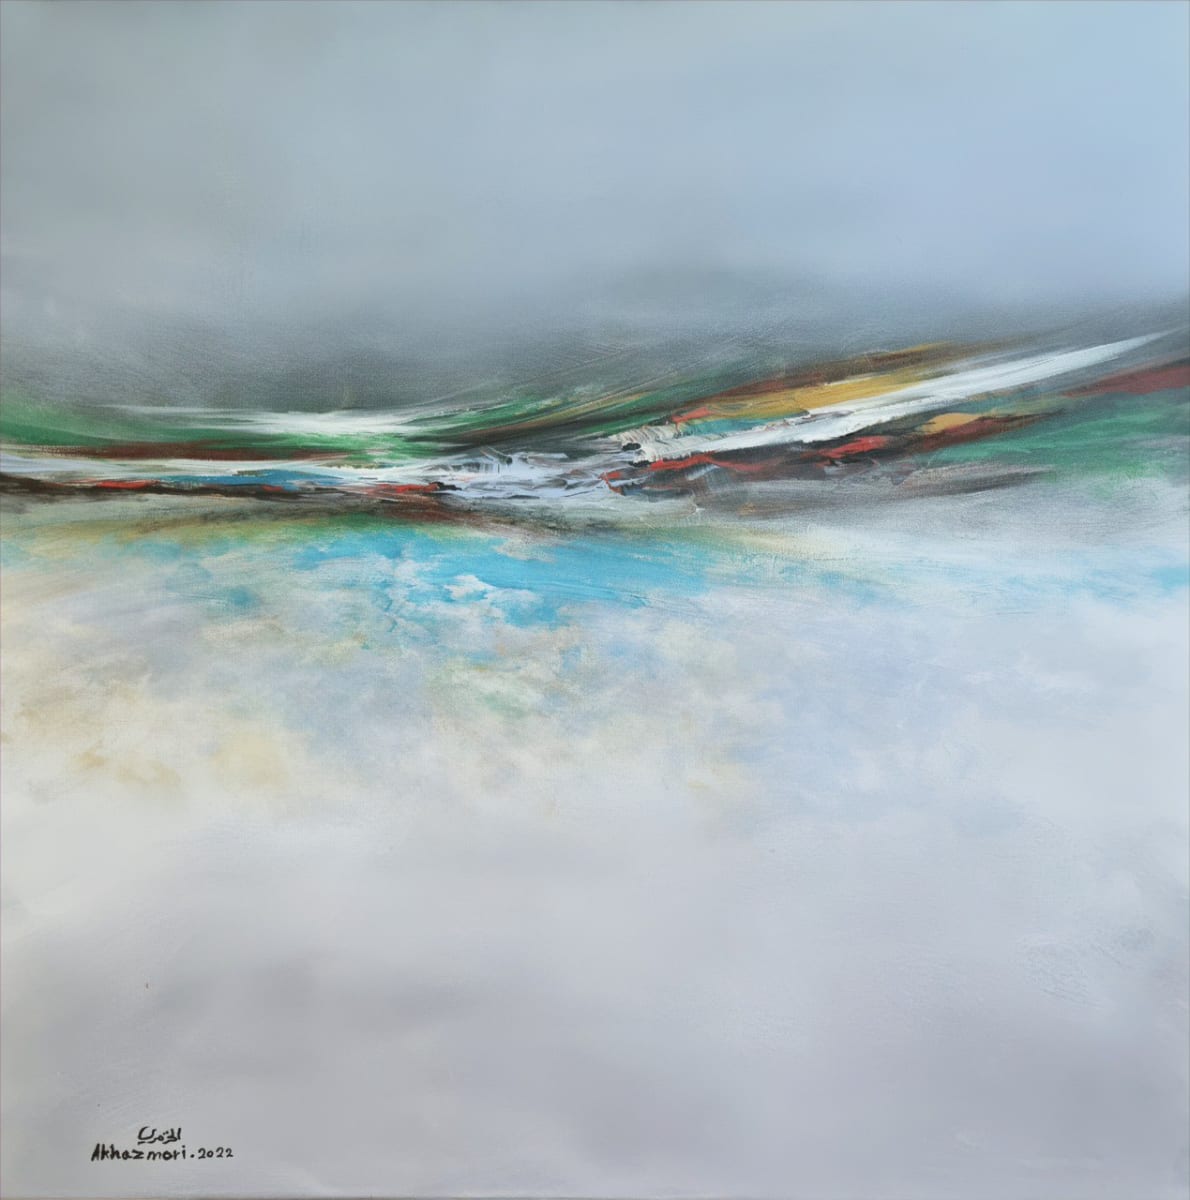 Confluence of Elements by Ahmed Al Khazmari  Image: "Confluence of Elements" — A masterful abstract that portrays the seamless dance of nature's elements, blending into a harmonious symphony of colors, reflecting the transient beauty where sky and water meet.





